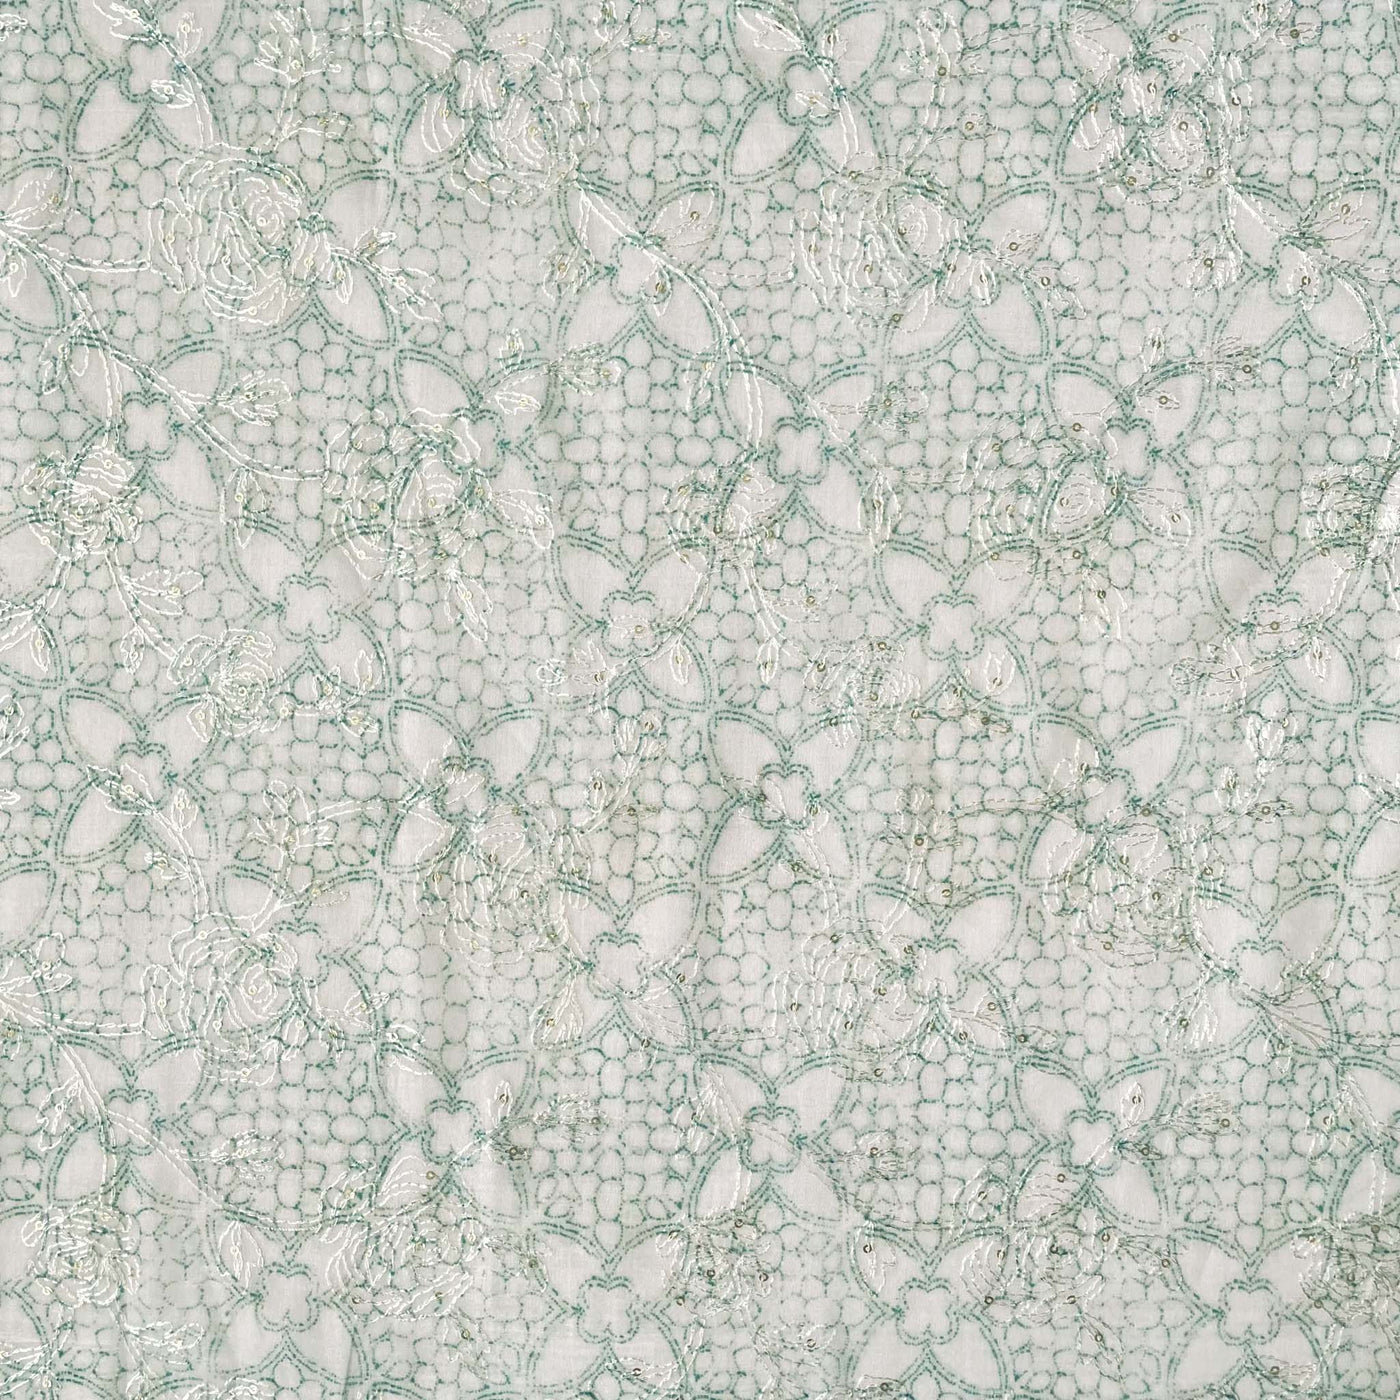 Digital Printed Embroidered Cotton Fabric Cut Piece (CUT PIECE) Dusty Ivory Green Abstract Floral Digital Printed Embroidered Cotton Fabric (Width 43 Inches)